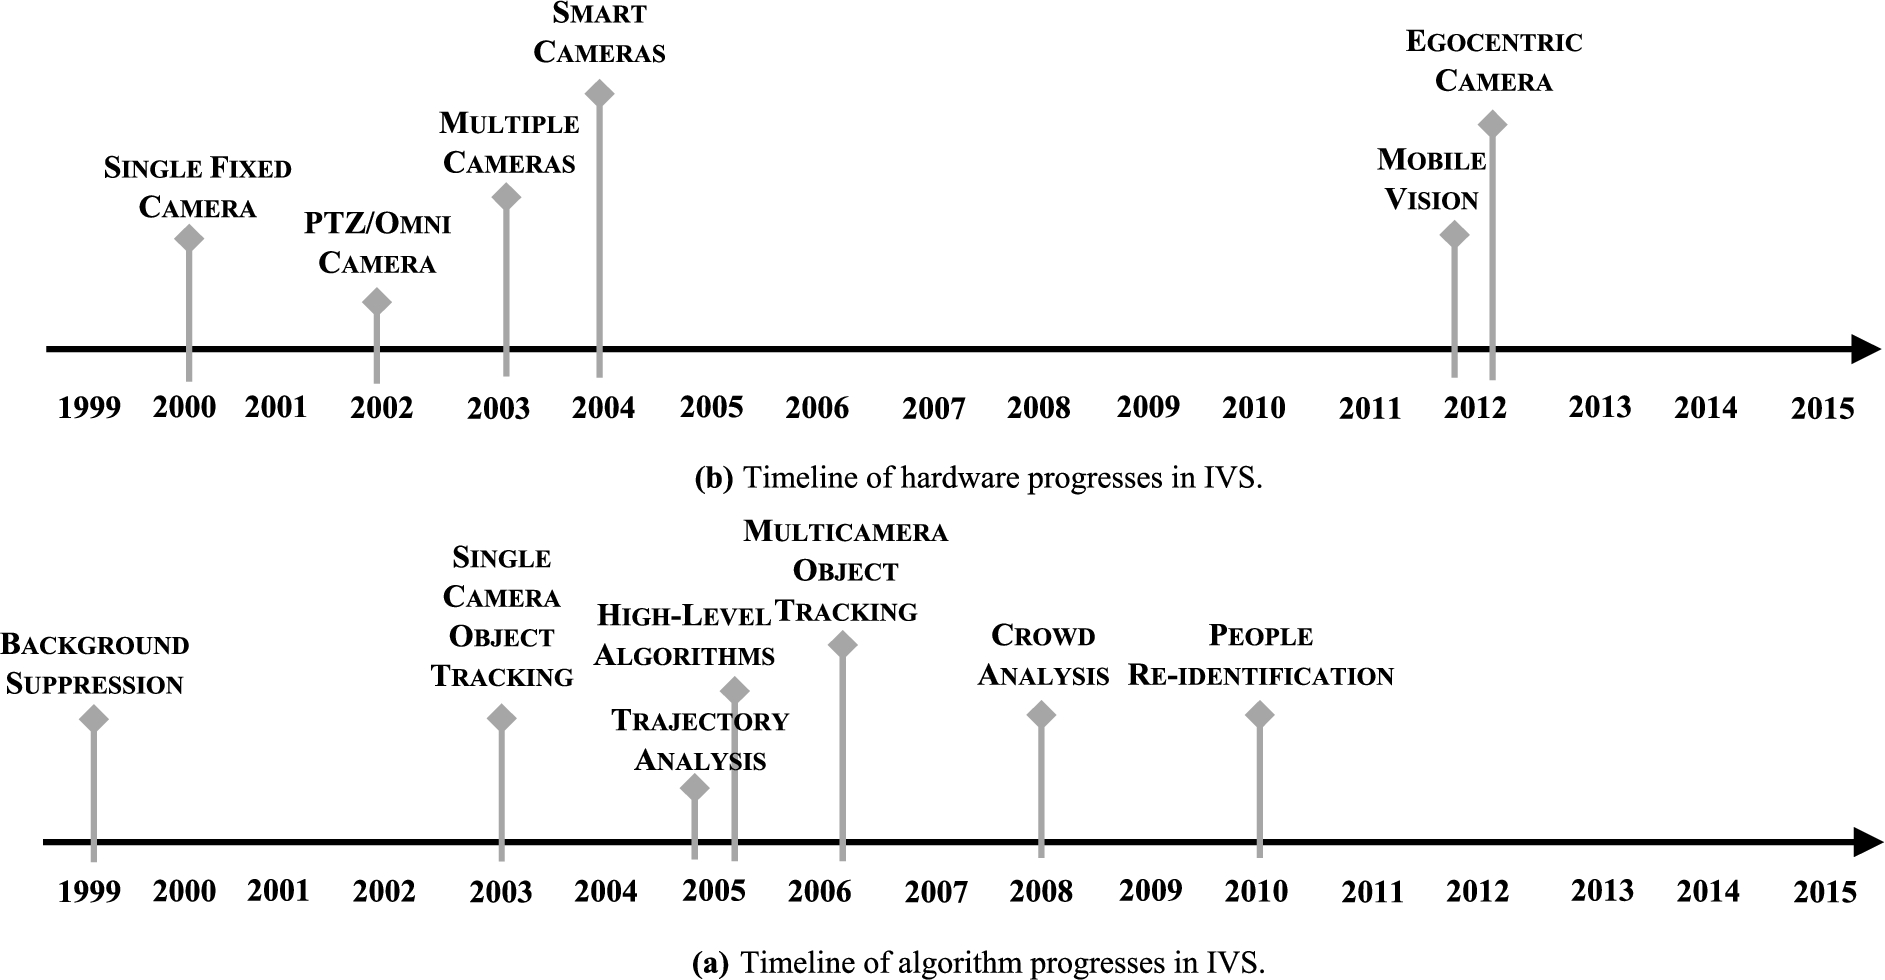 (a) Approximated timeline of hardware progresses for IVS. (b) Approximated timeline of algorithm progresses for IVS.